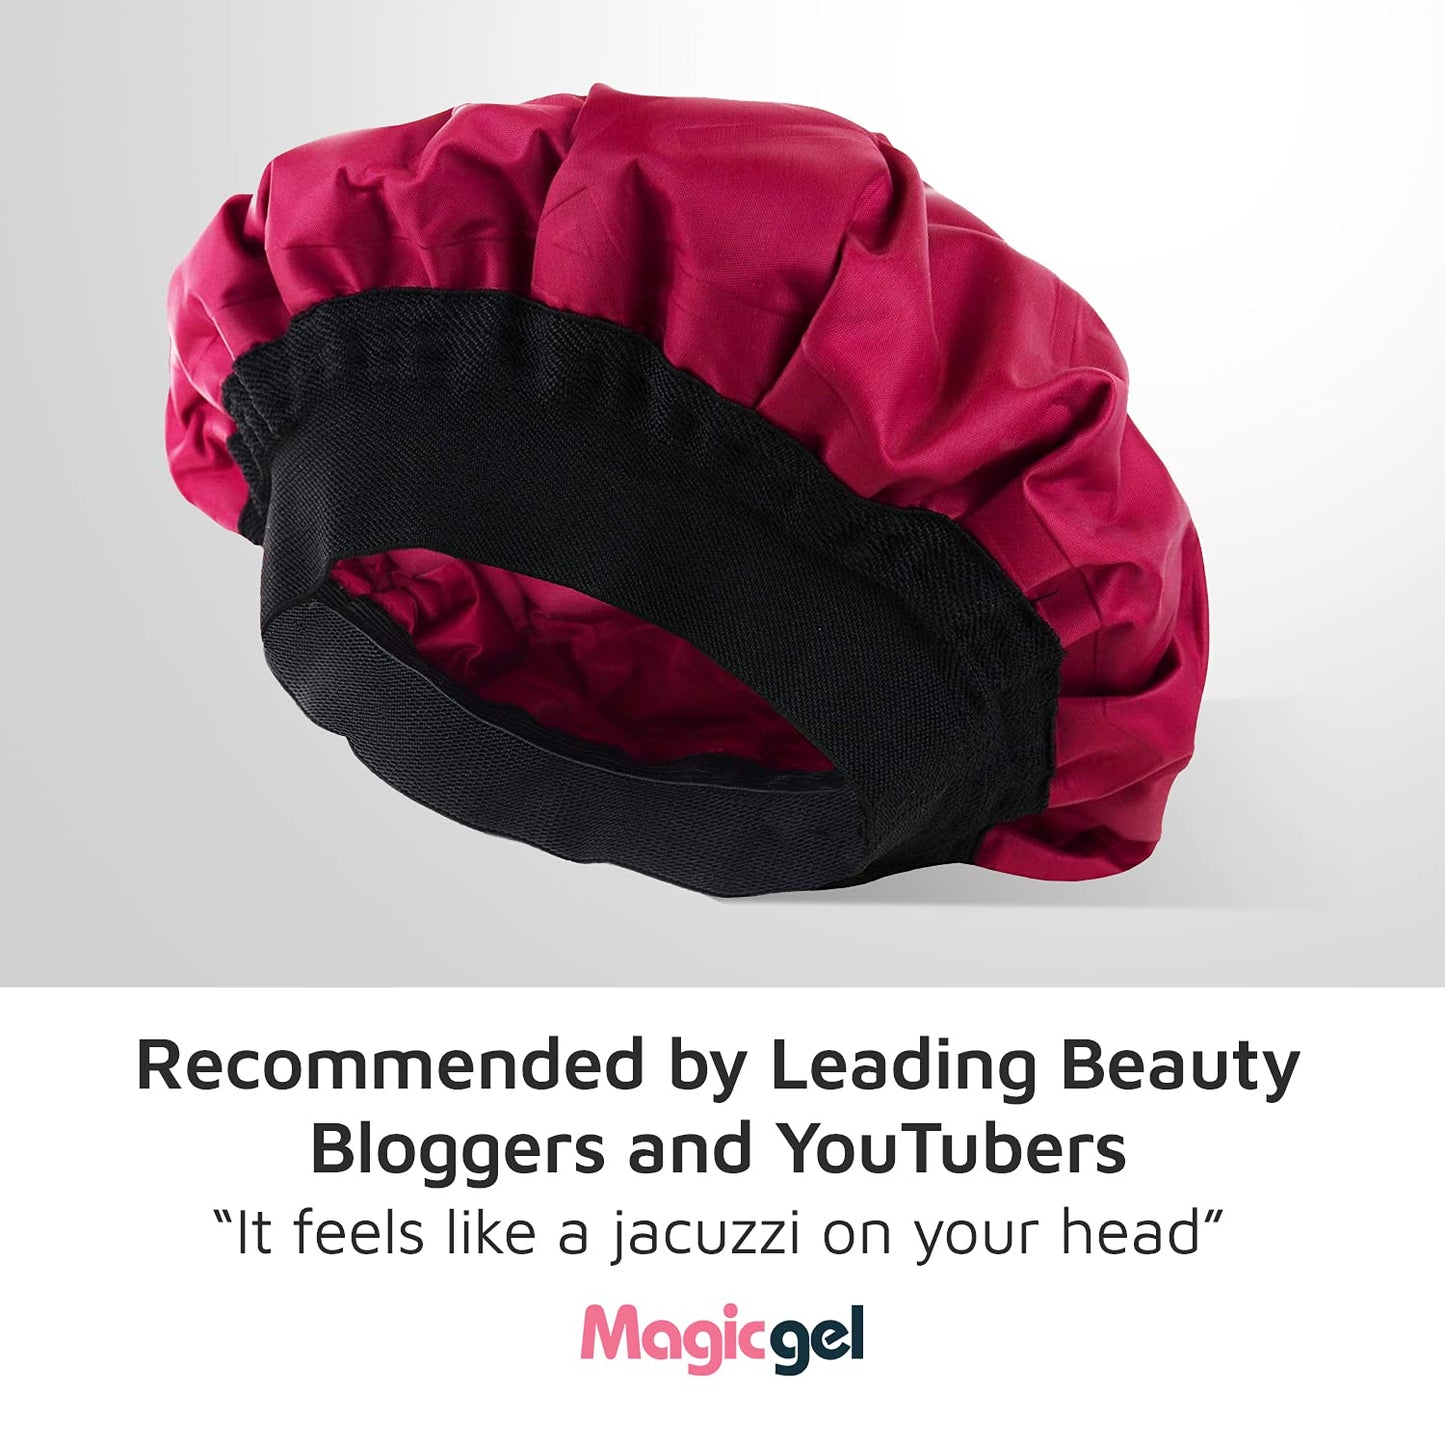 Deep-Conditioning Cordless Hair Cap for Softer, Nourished, Hydrated Hair